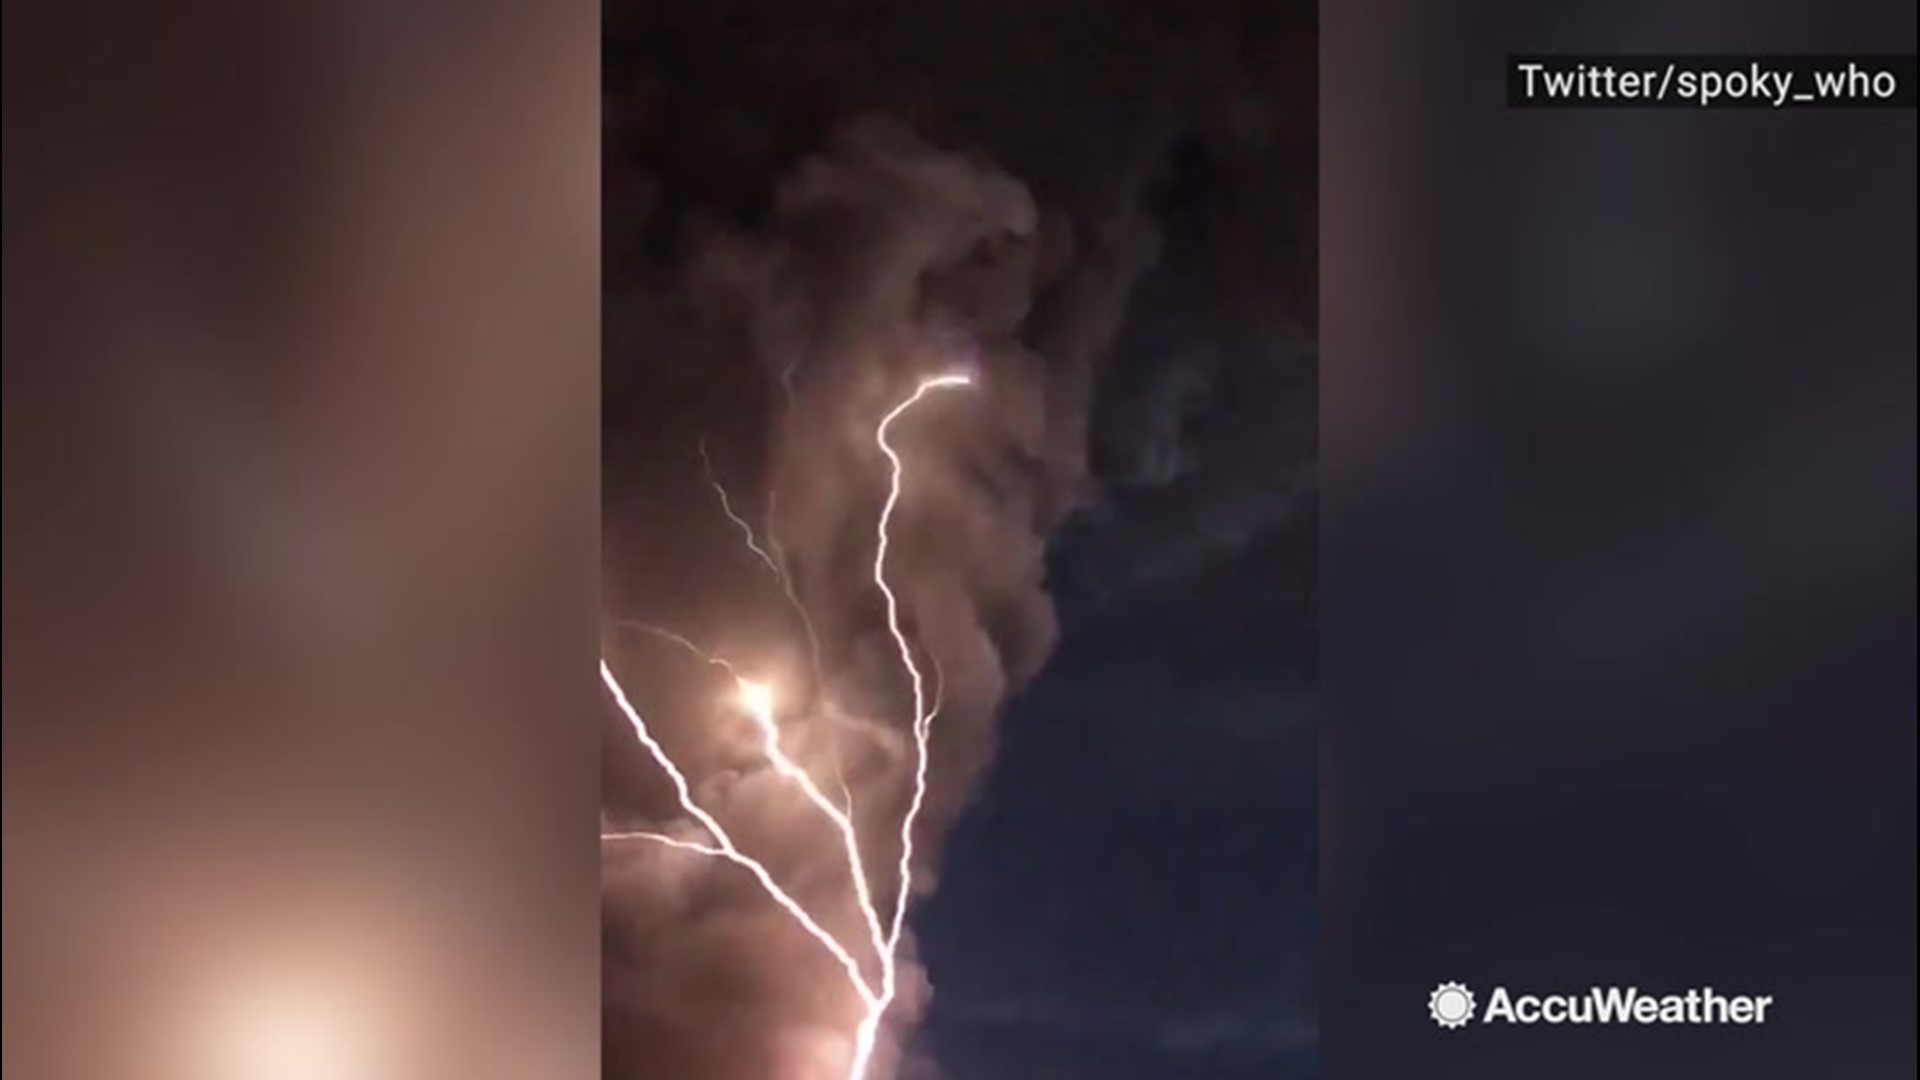 As the Taal Volcano erupted in the Philippines on Jan. 12, an incredible lightning strike was caught on camera scattering across the sky in nearby Tagaytay City.